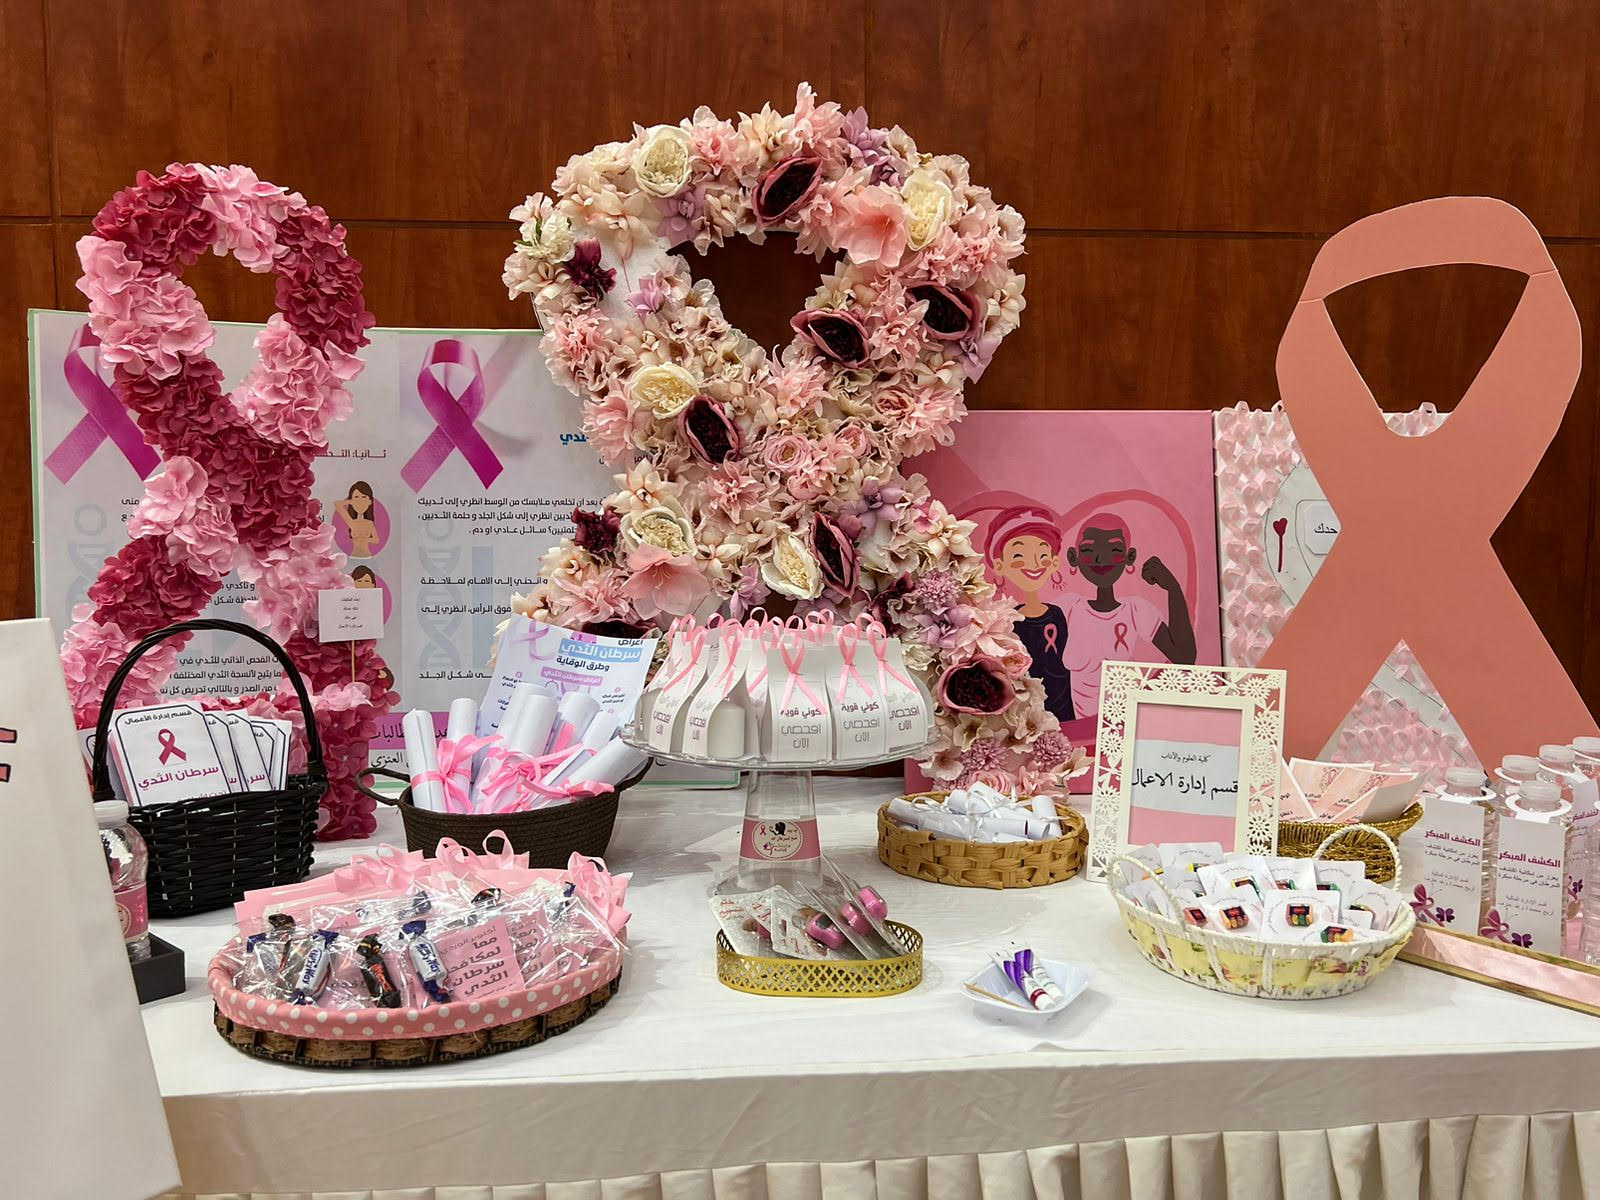 The Girls College Complex in Qurayyat holds a breast cancer awareness event in 2023